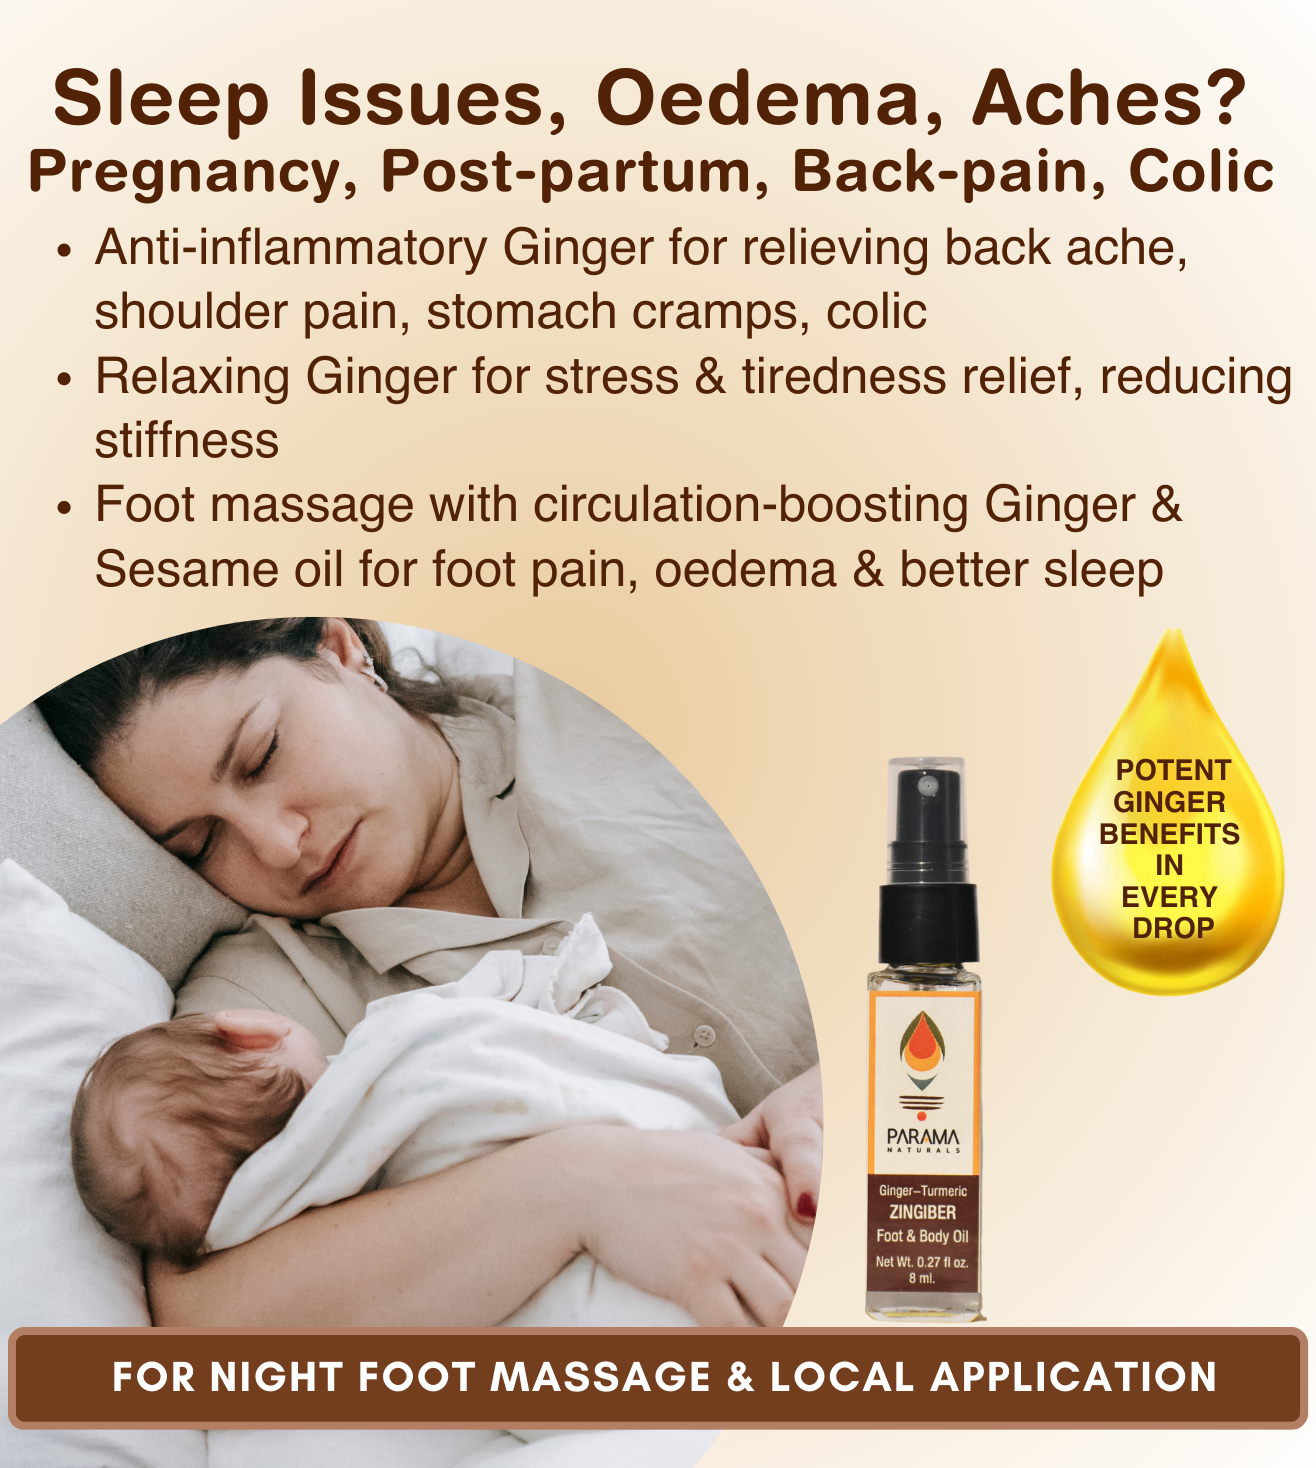 Sleep Issues, Oedema, Aches, Pregnancy, Post-partum, Back-pain, Colic, Anti-inflammatory ginger for relieving back ache, shoulder pain, stomach cramps, Relaxing Ginger for stress & tiredness relief, reducing stiffness